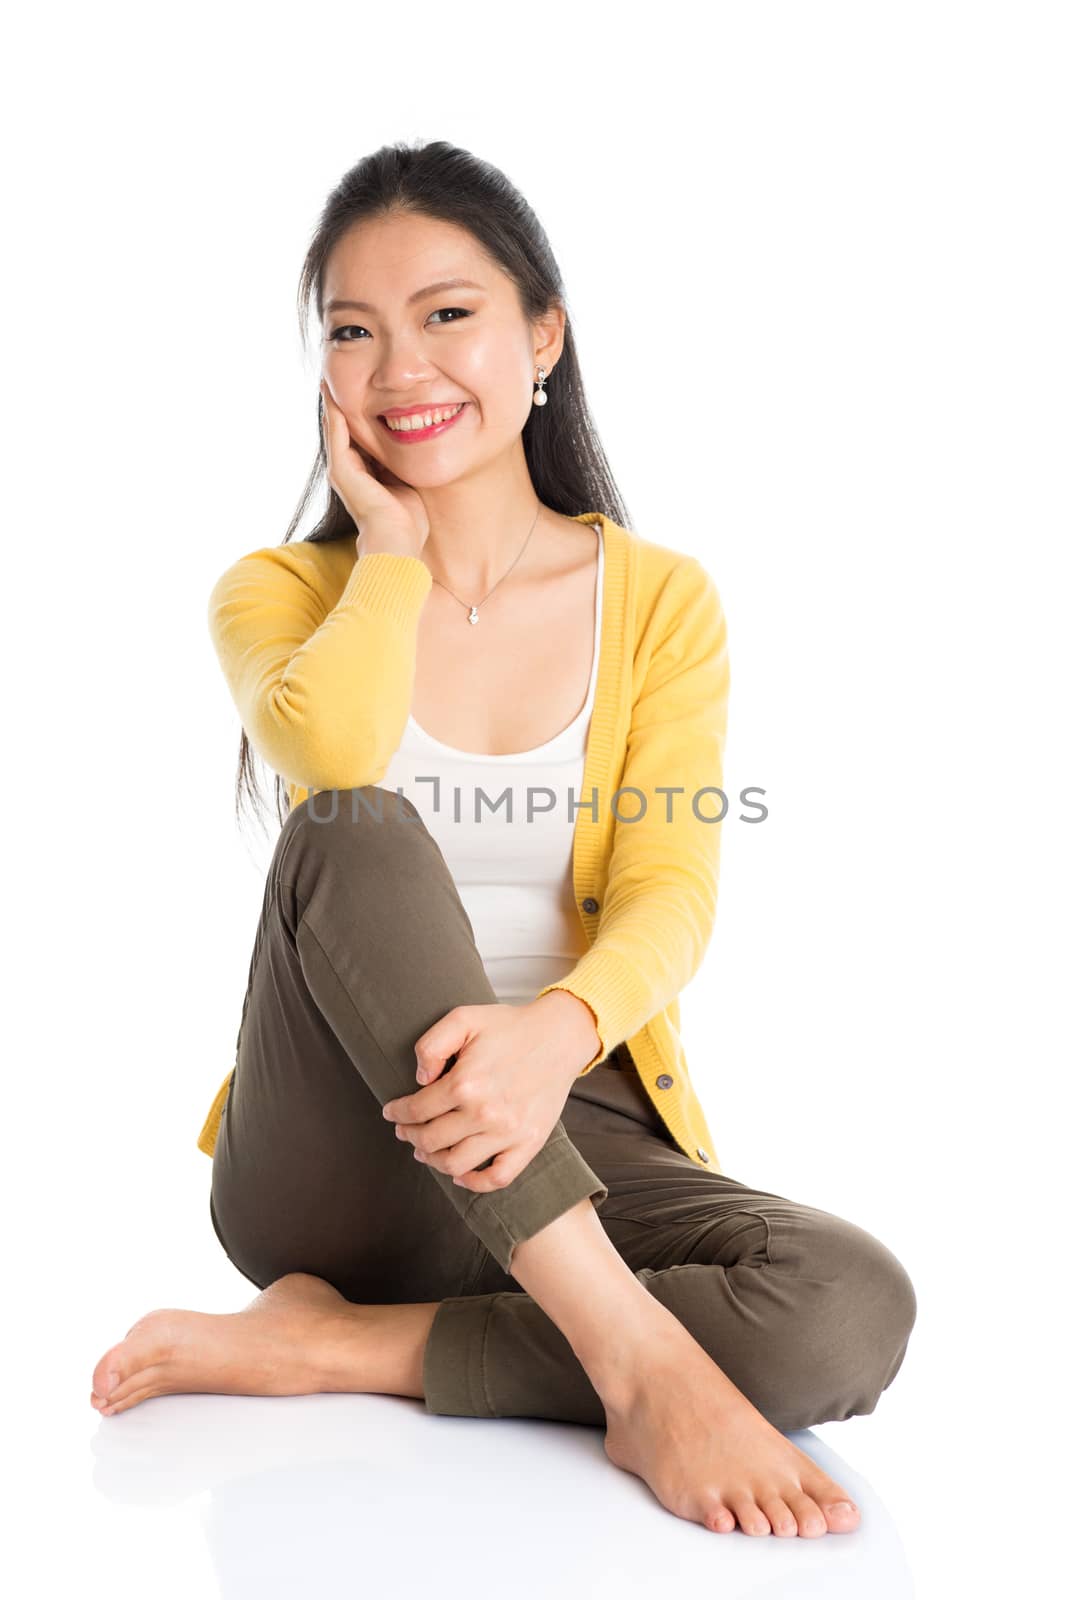 Full length Asian female sitting on floor smiling and looking at camera, isolated on white background.